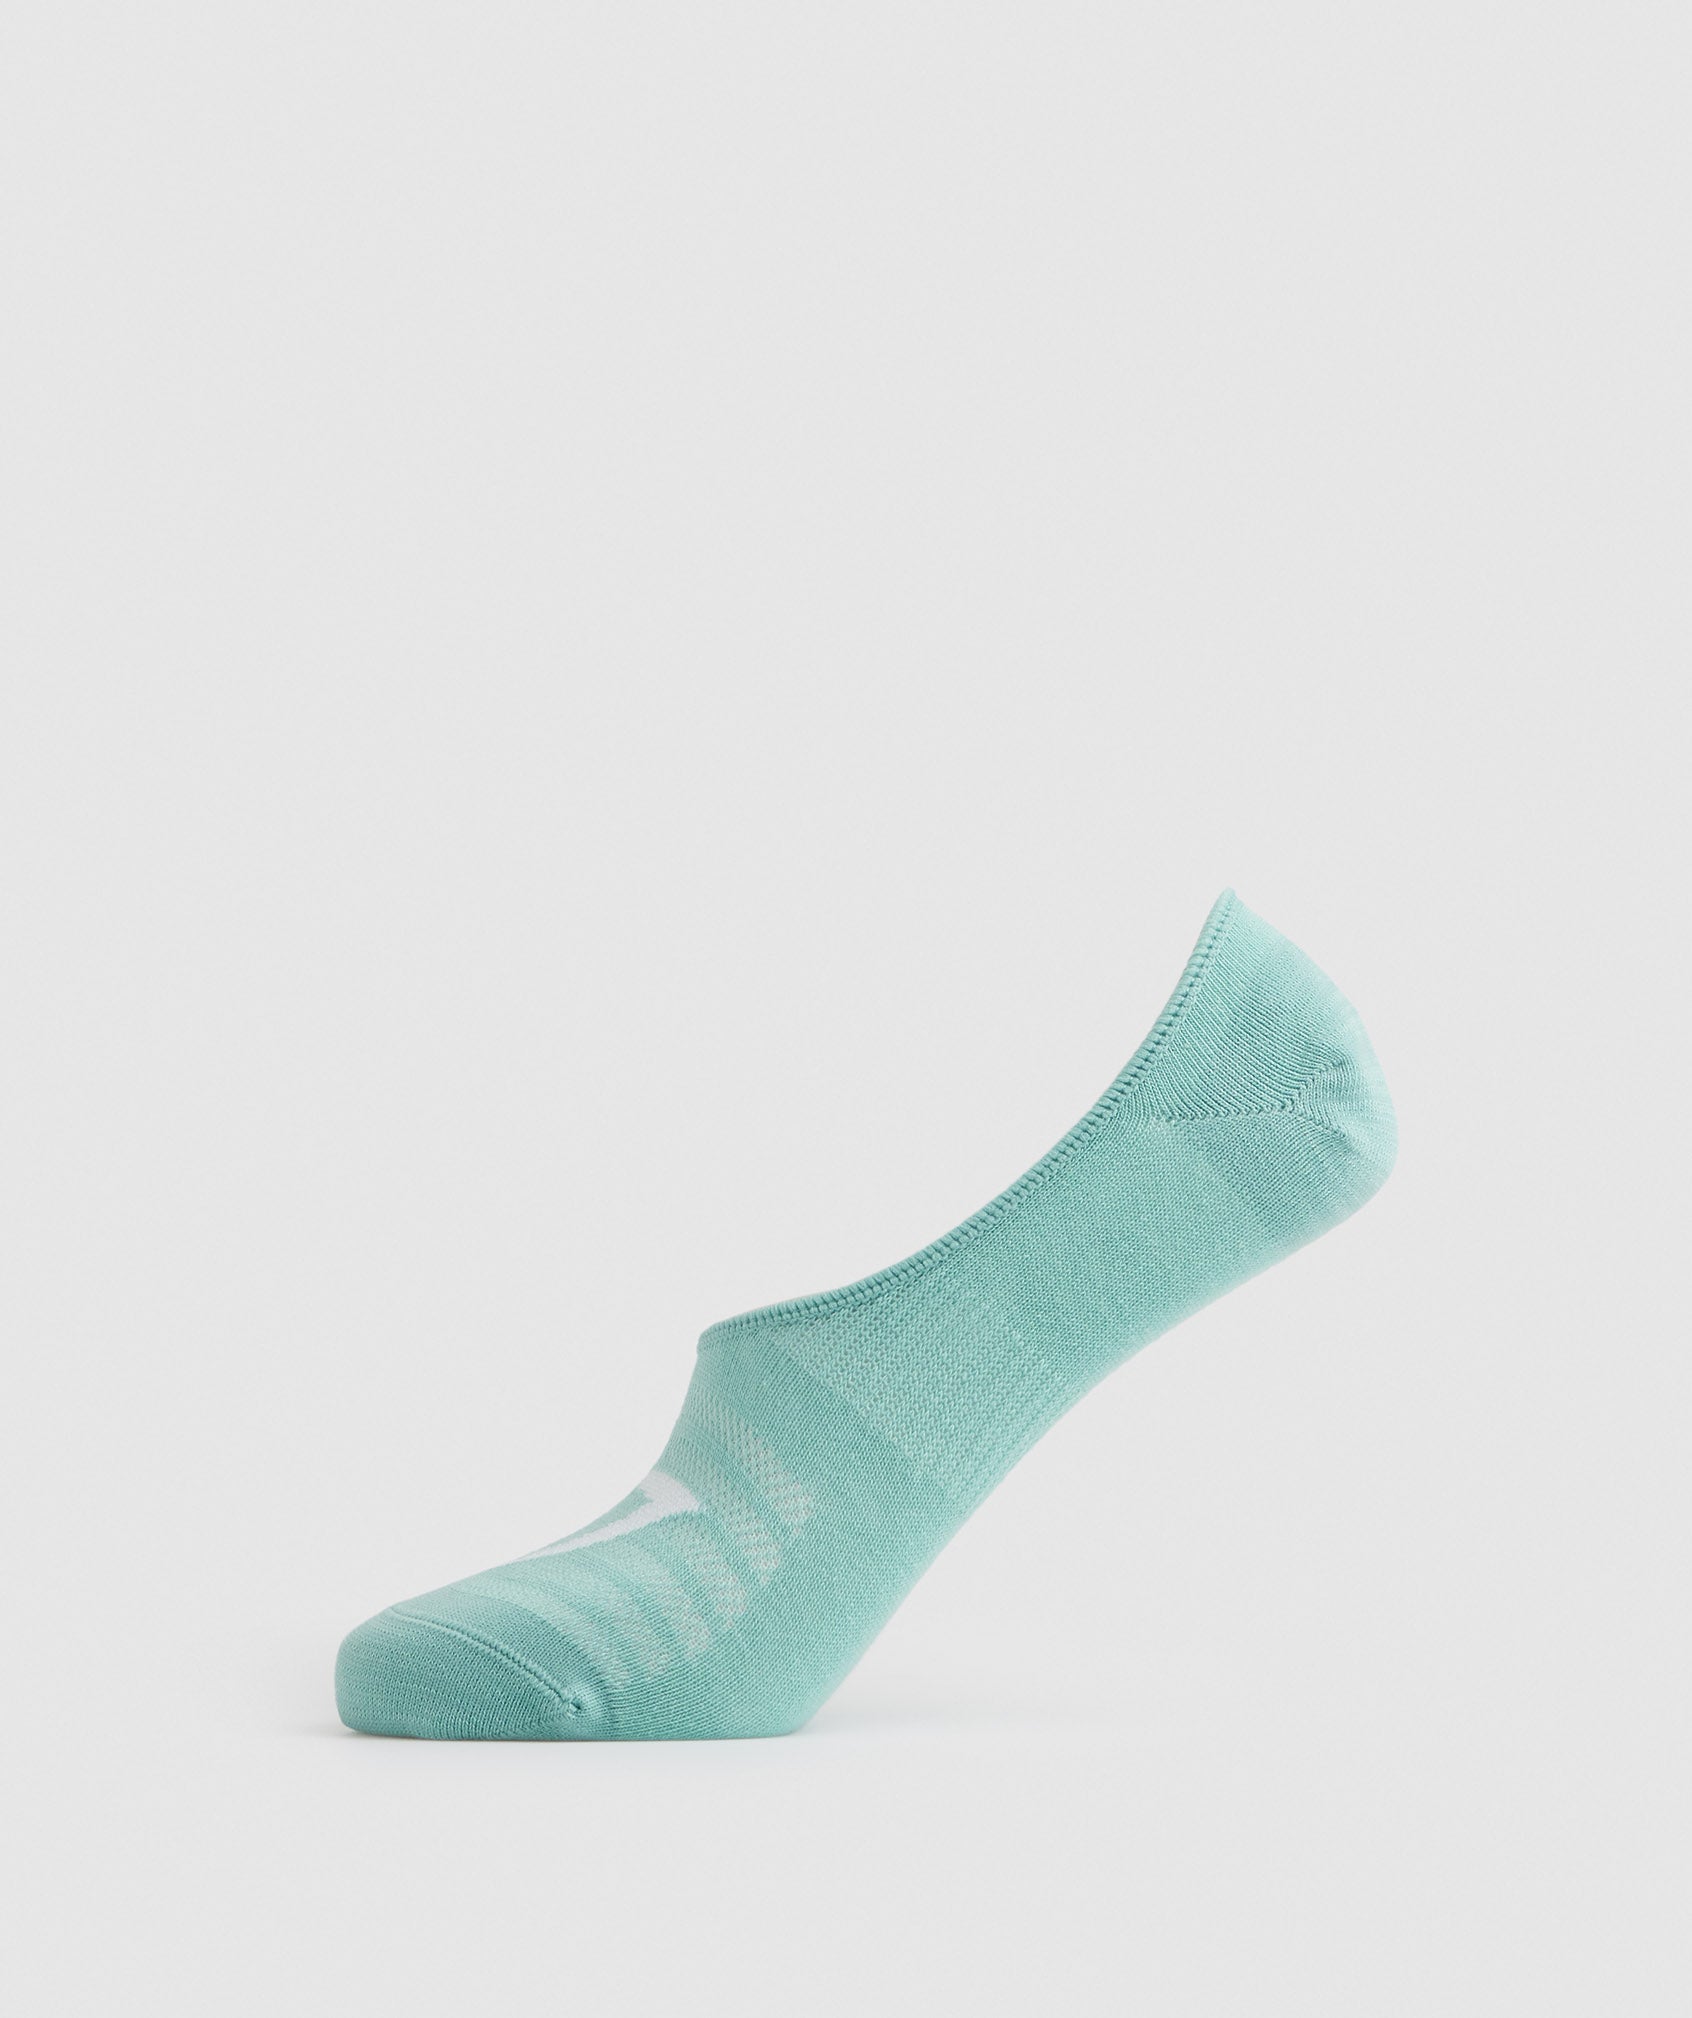 No Show Socks 3pk in Winter Teal/Pearl Blue/White - view 5